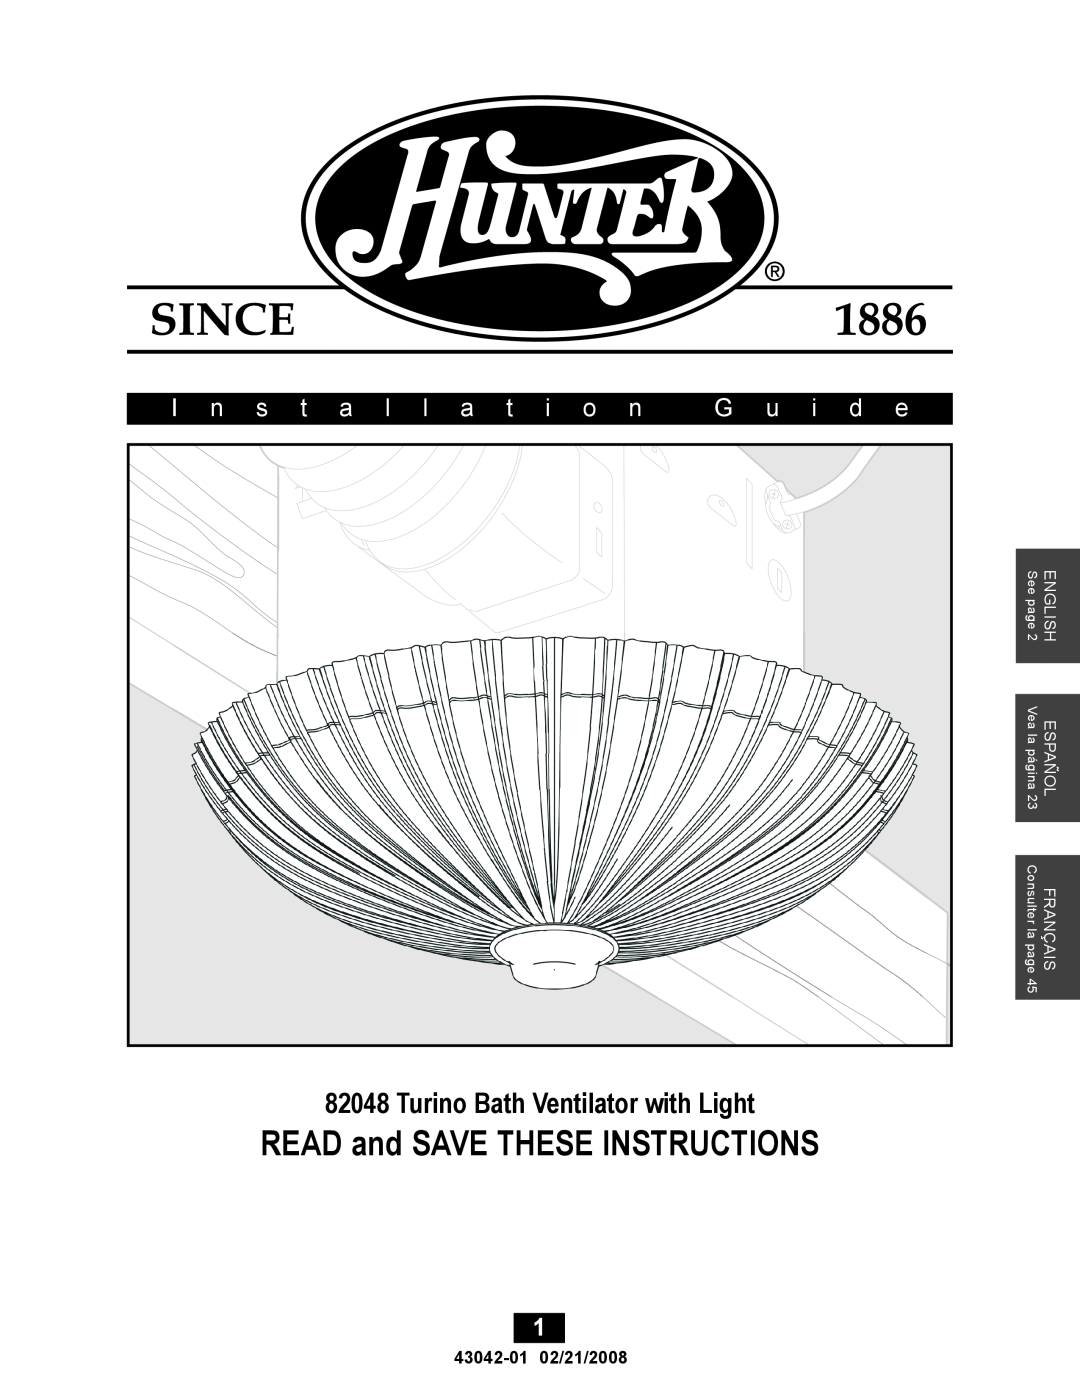 Hunter Fan 82048 manual I n s t a l l a t i o n, G u i d e, READ and SAVE THESE INSTRUCTIONS, 43042-01 02/21/2008 